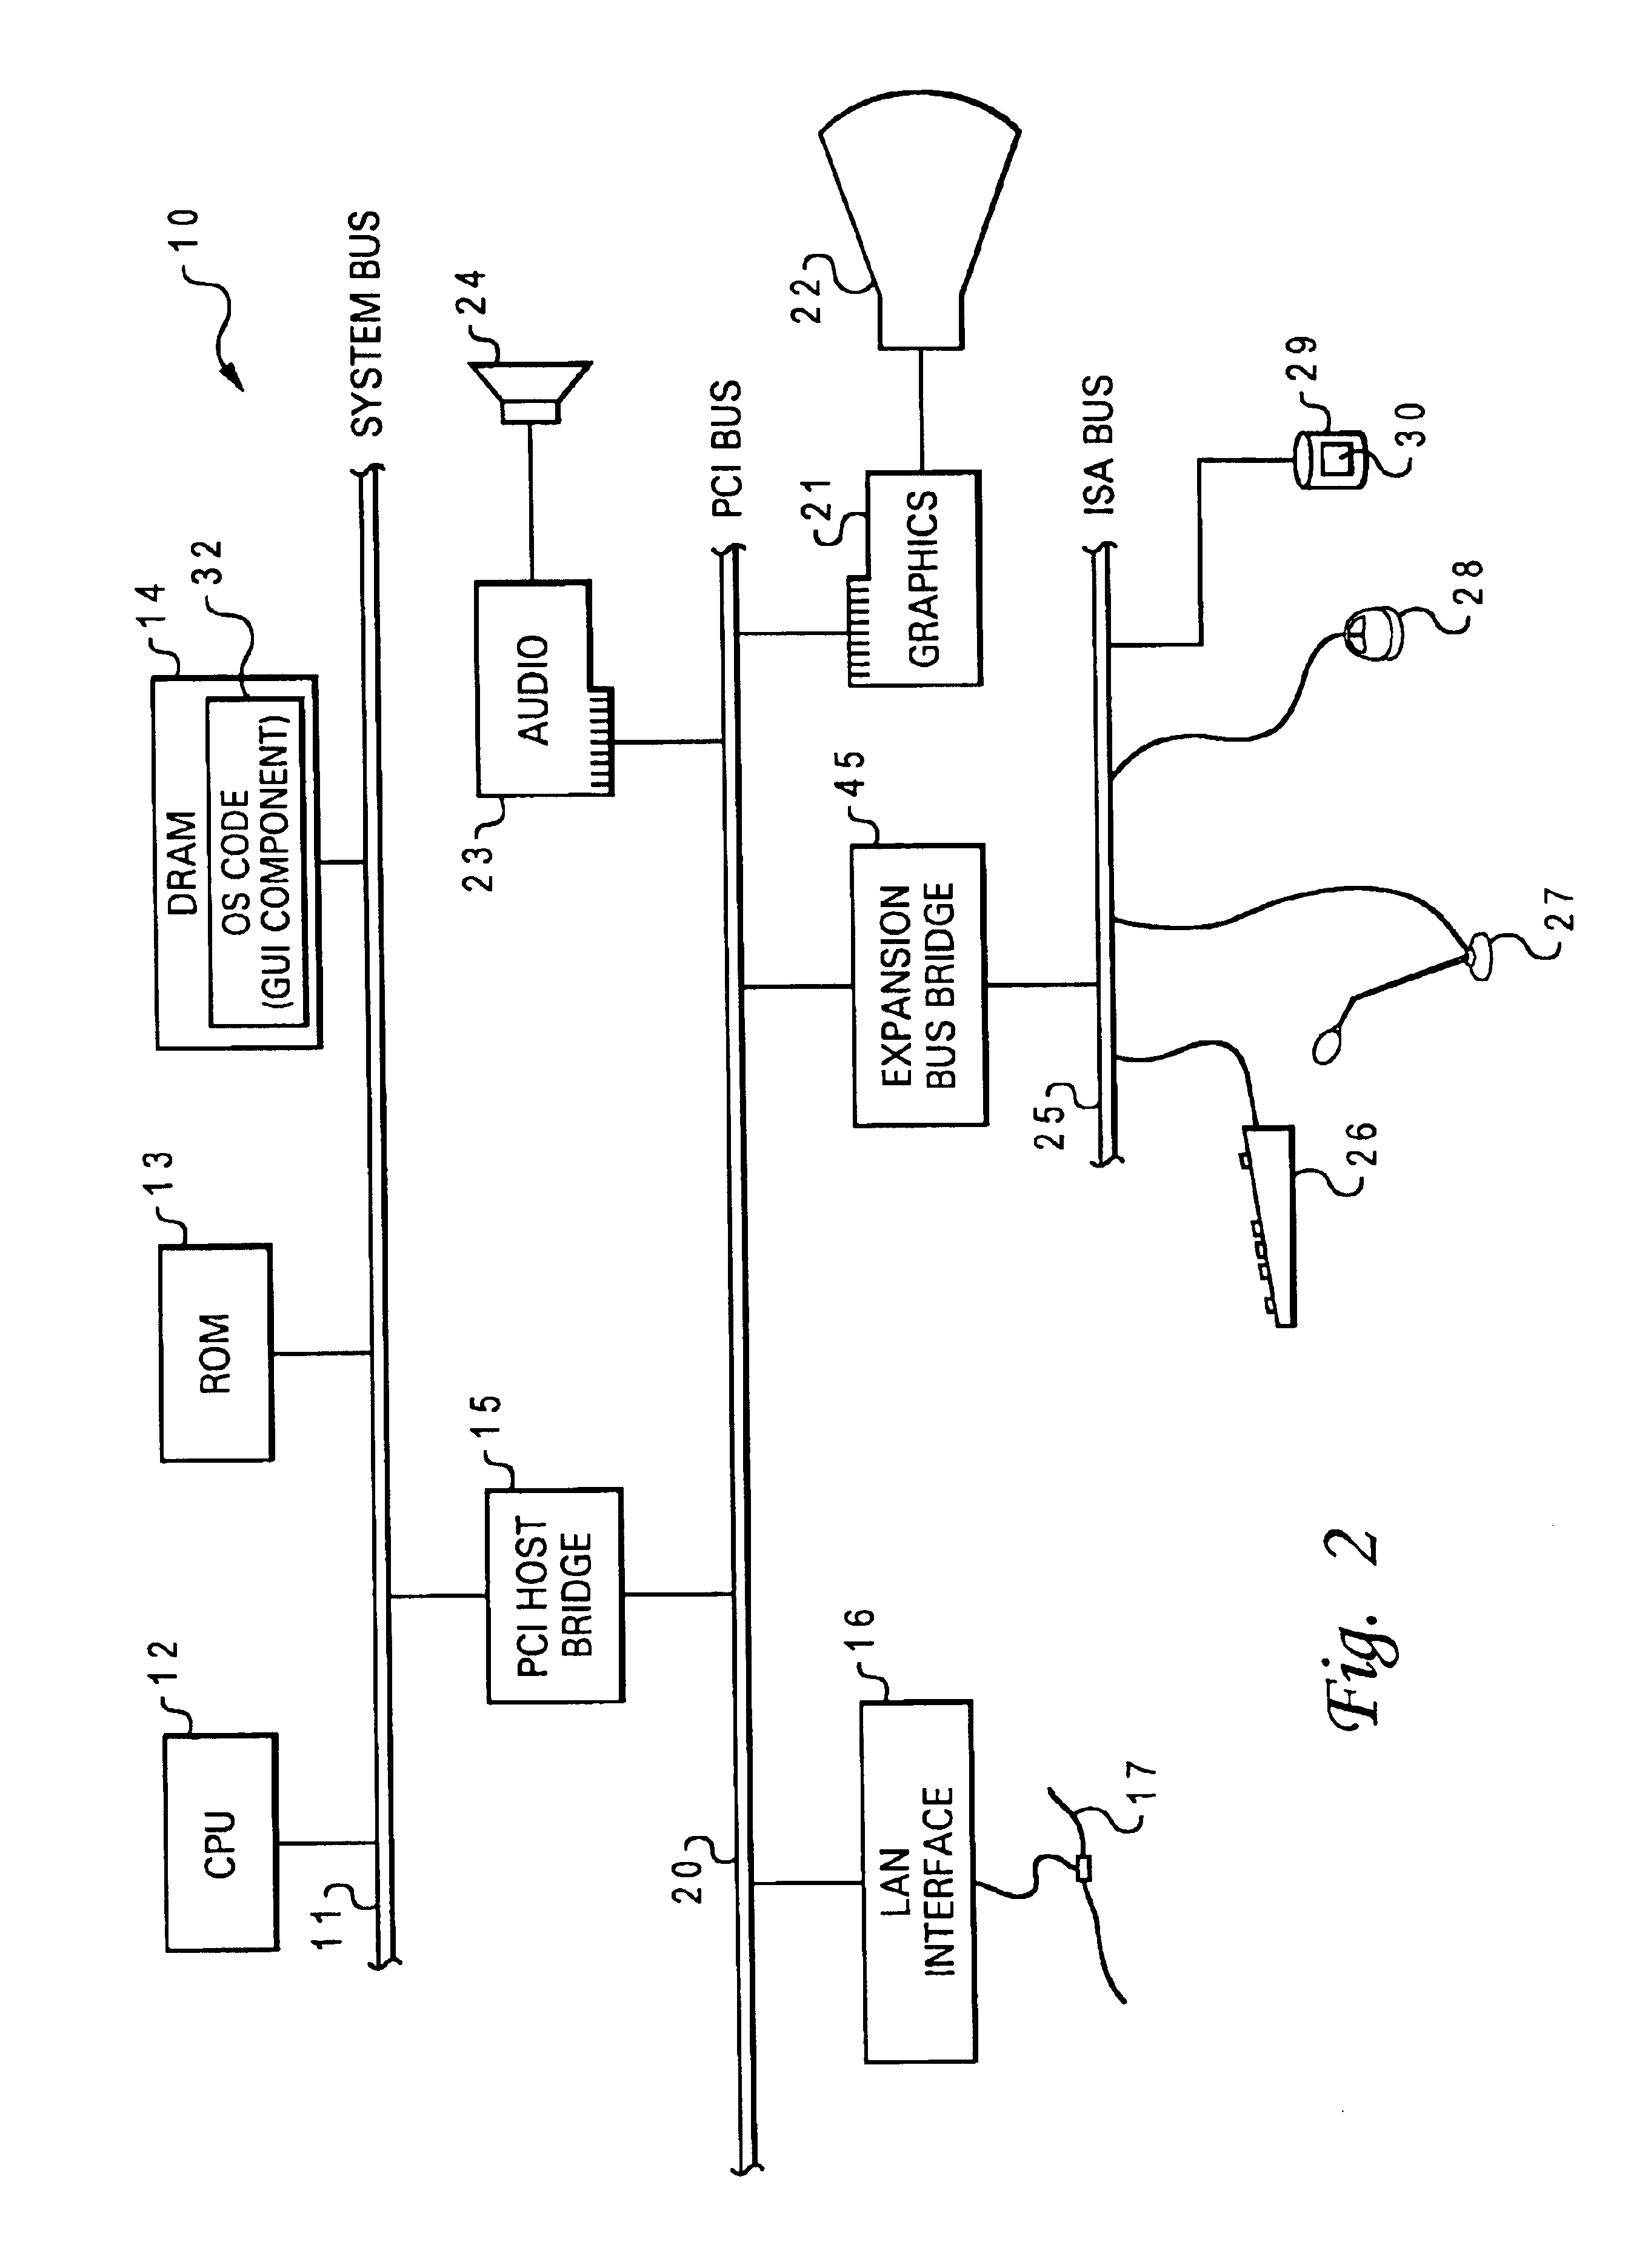 Mixed mode input for a graphical user interface (GUI) of a data processing system